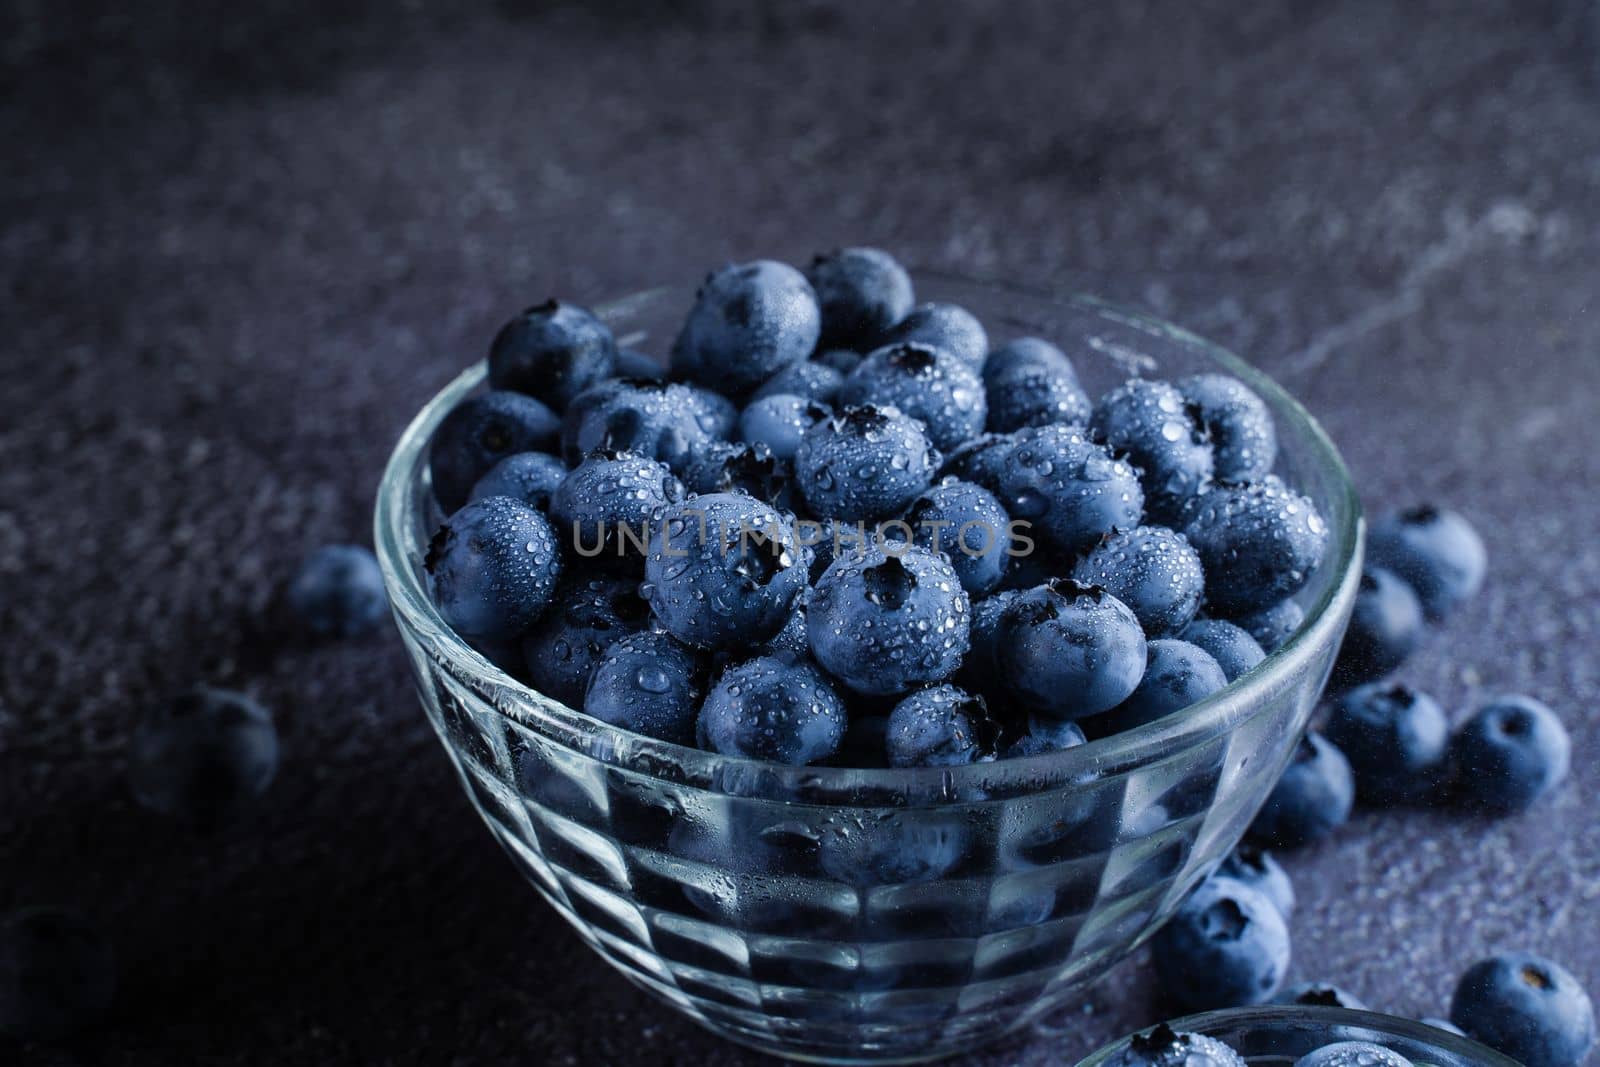 Blueberries organic natural berry with water drops on dark background. Blueberry in glass bowl plate. by Rabizo